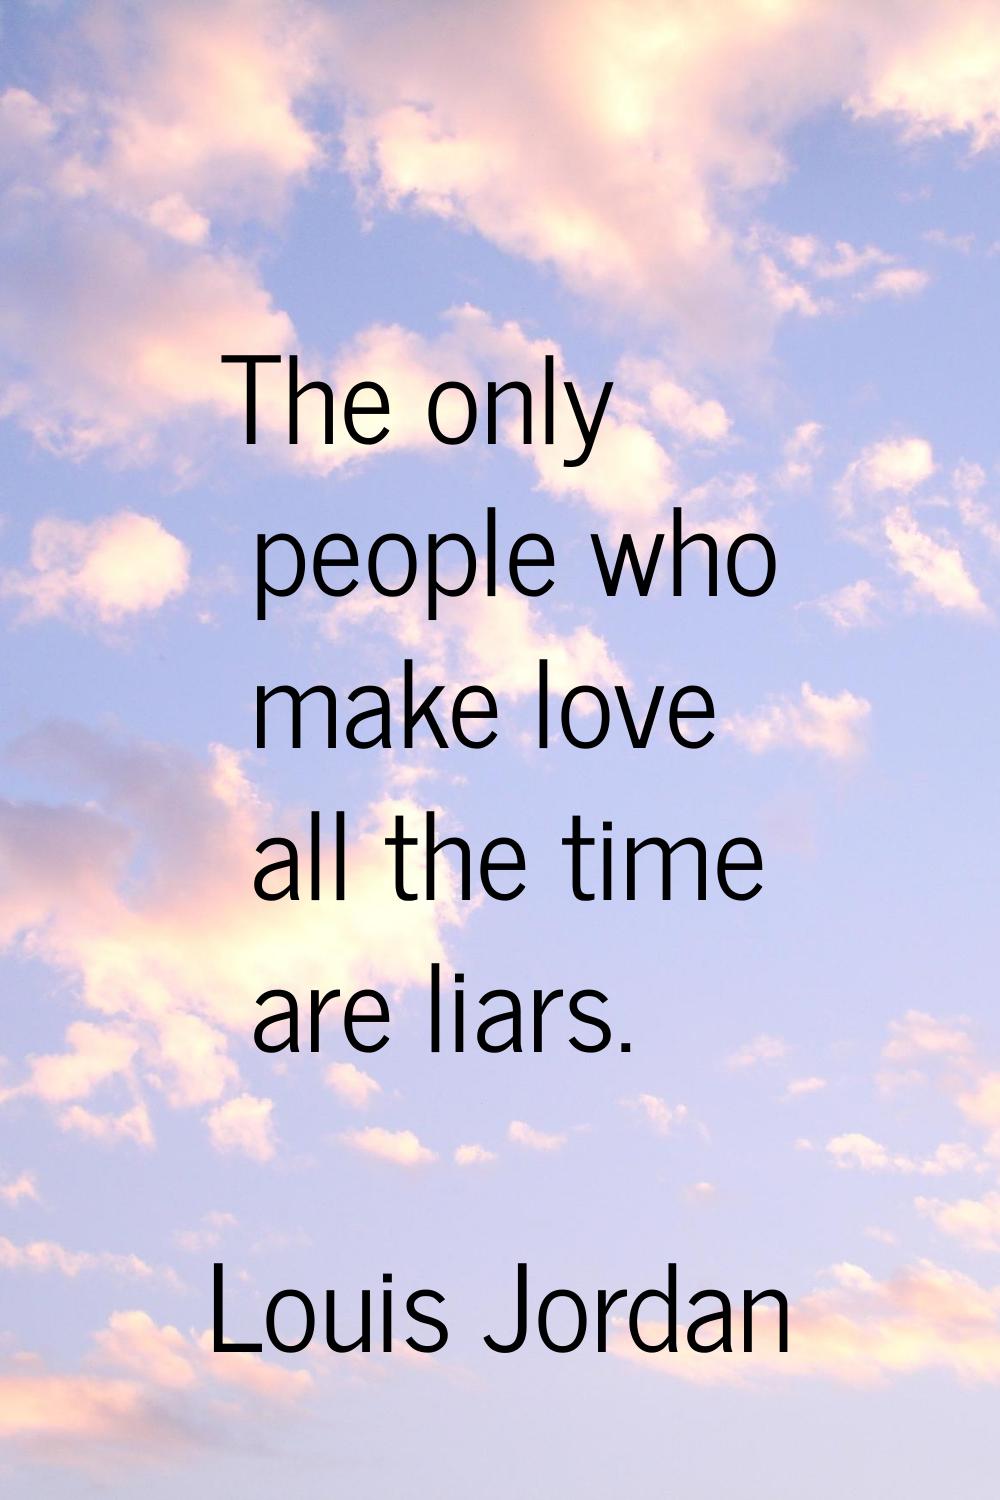 The only people who make love all the time are liars.